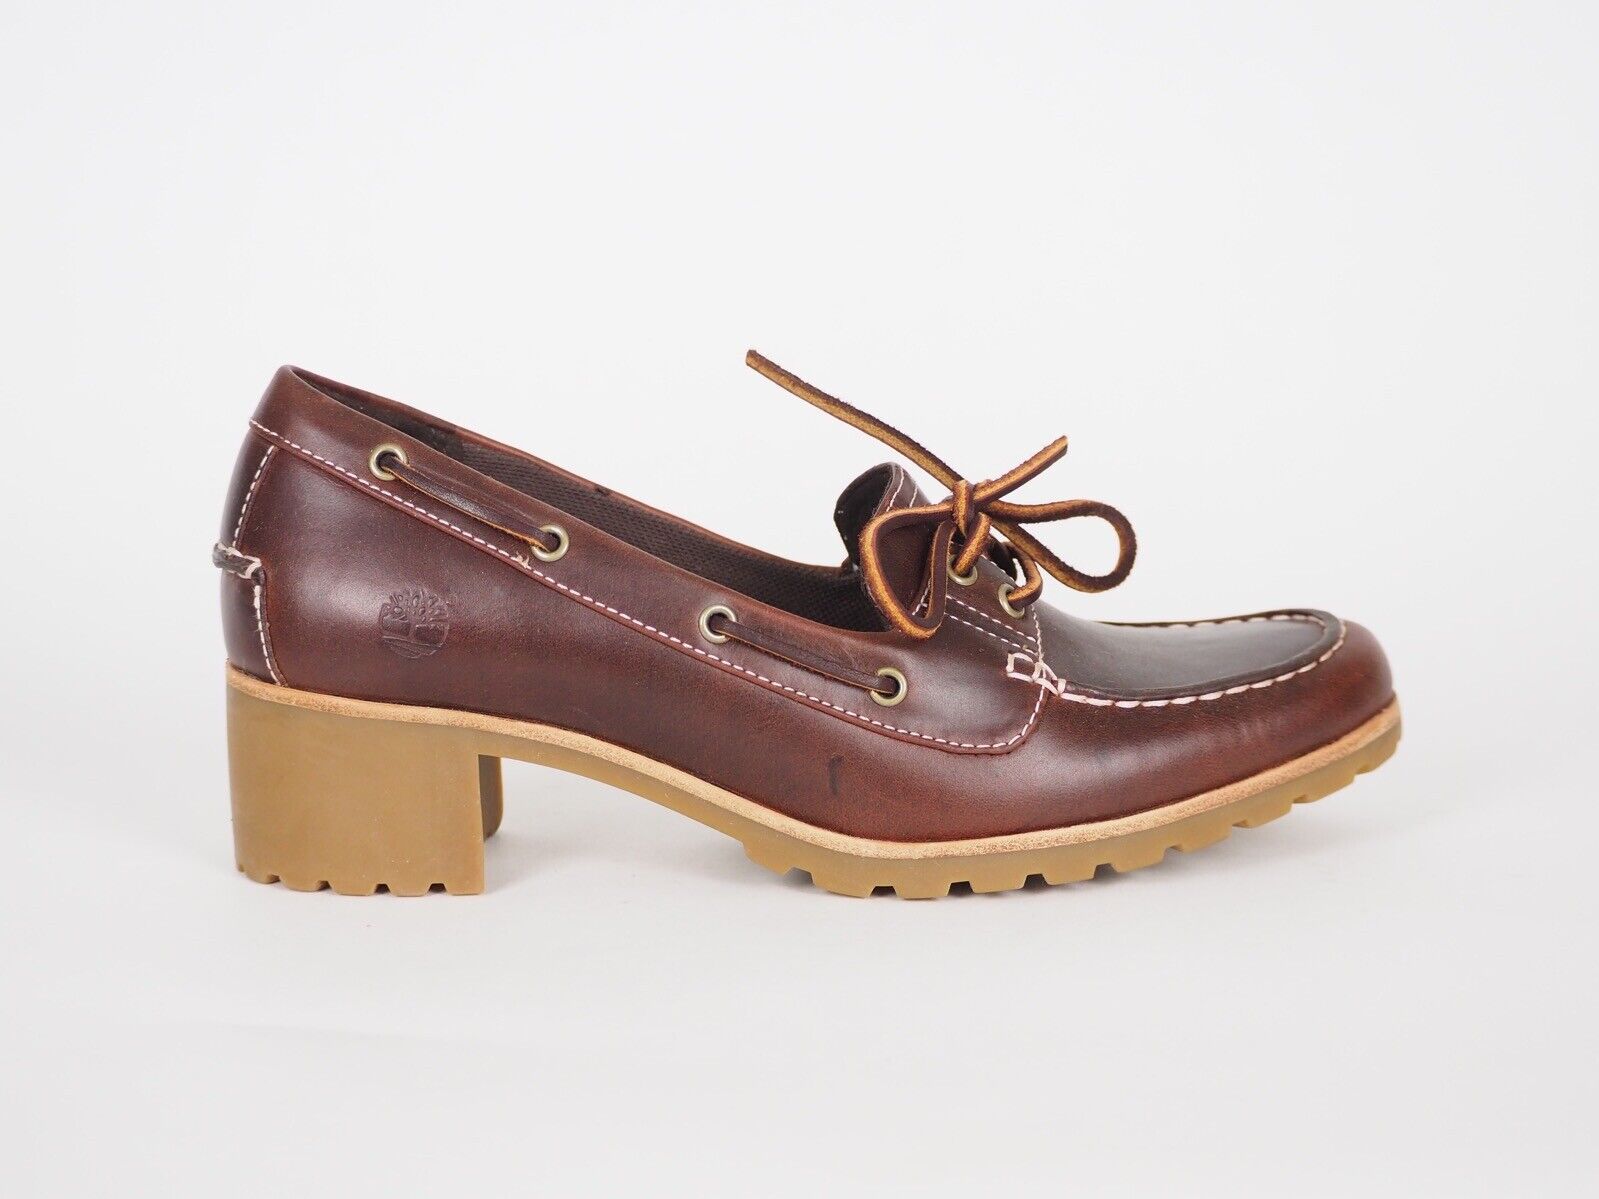 Womens Timberland Bergen 20625 Brown Leather 2 Eye Heeled Deck Boat Shoes - London Top Style